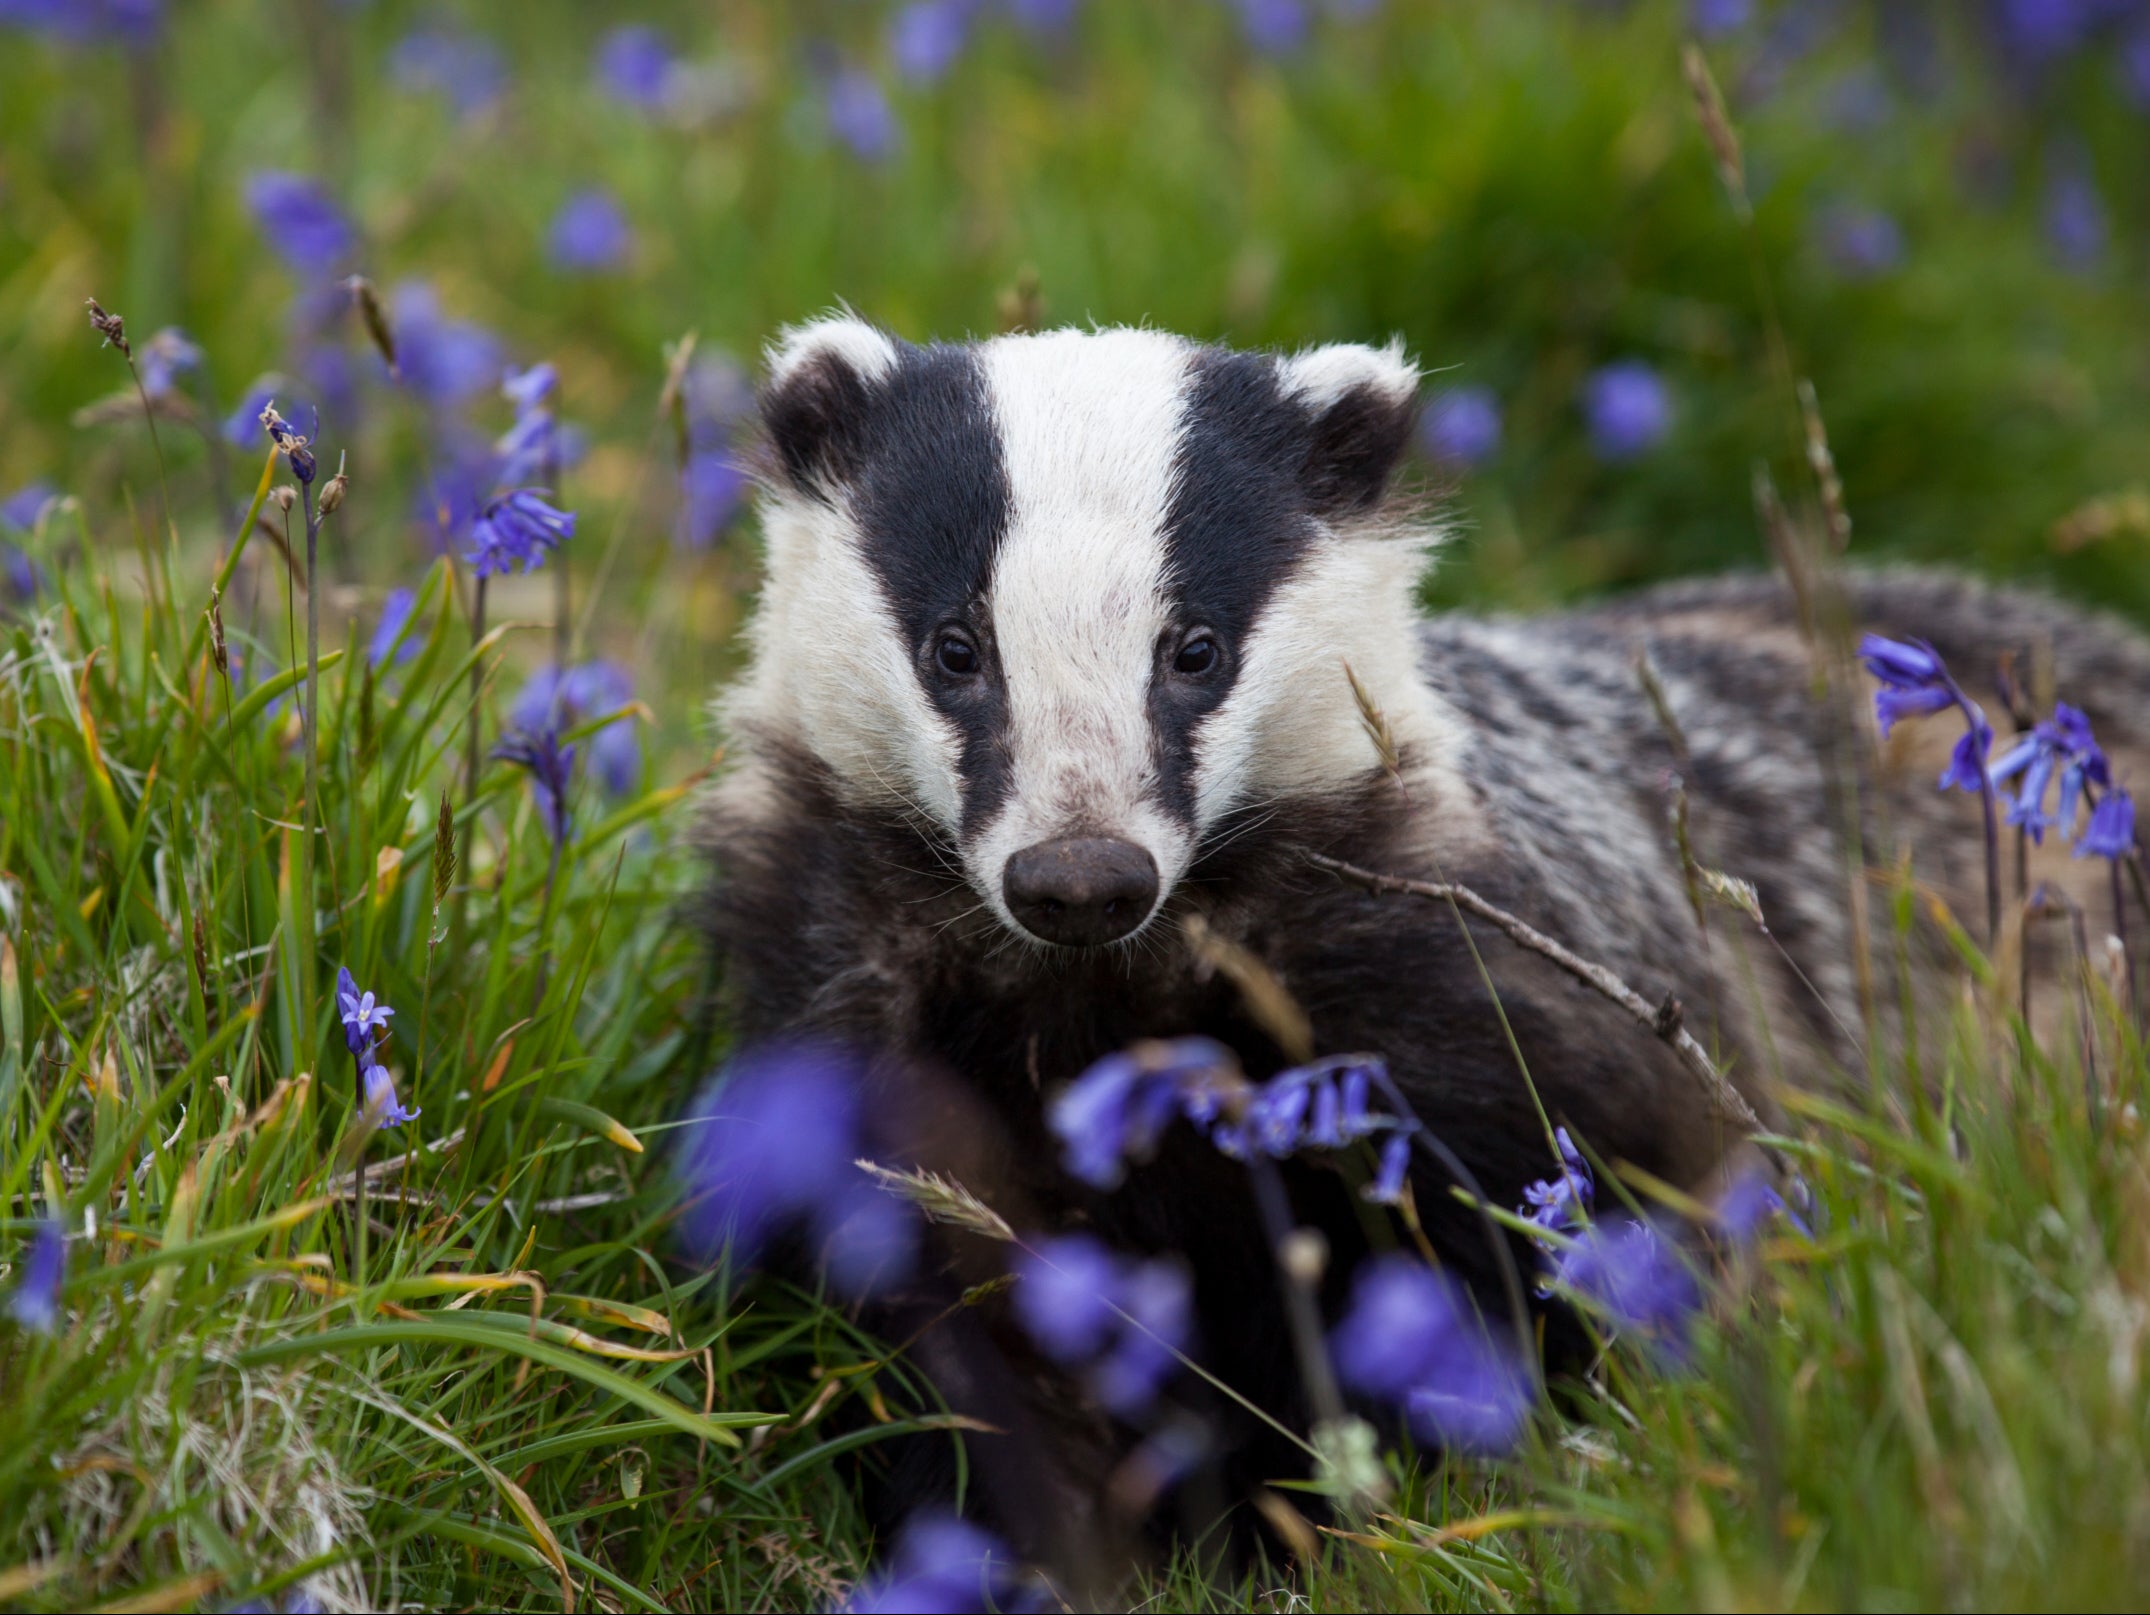 Tens of thousands of badgers are killed each year